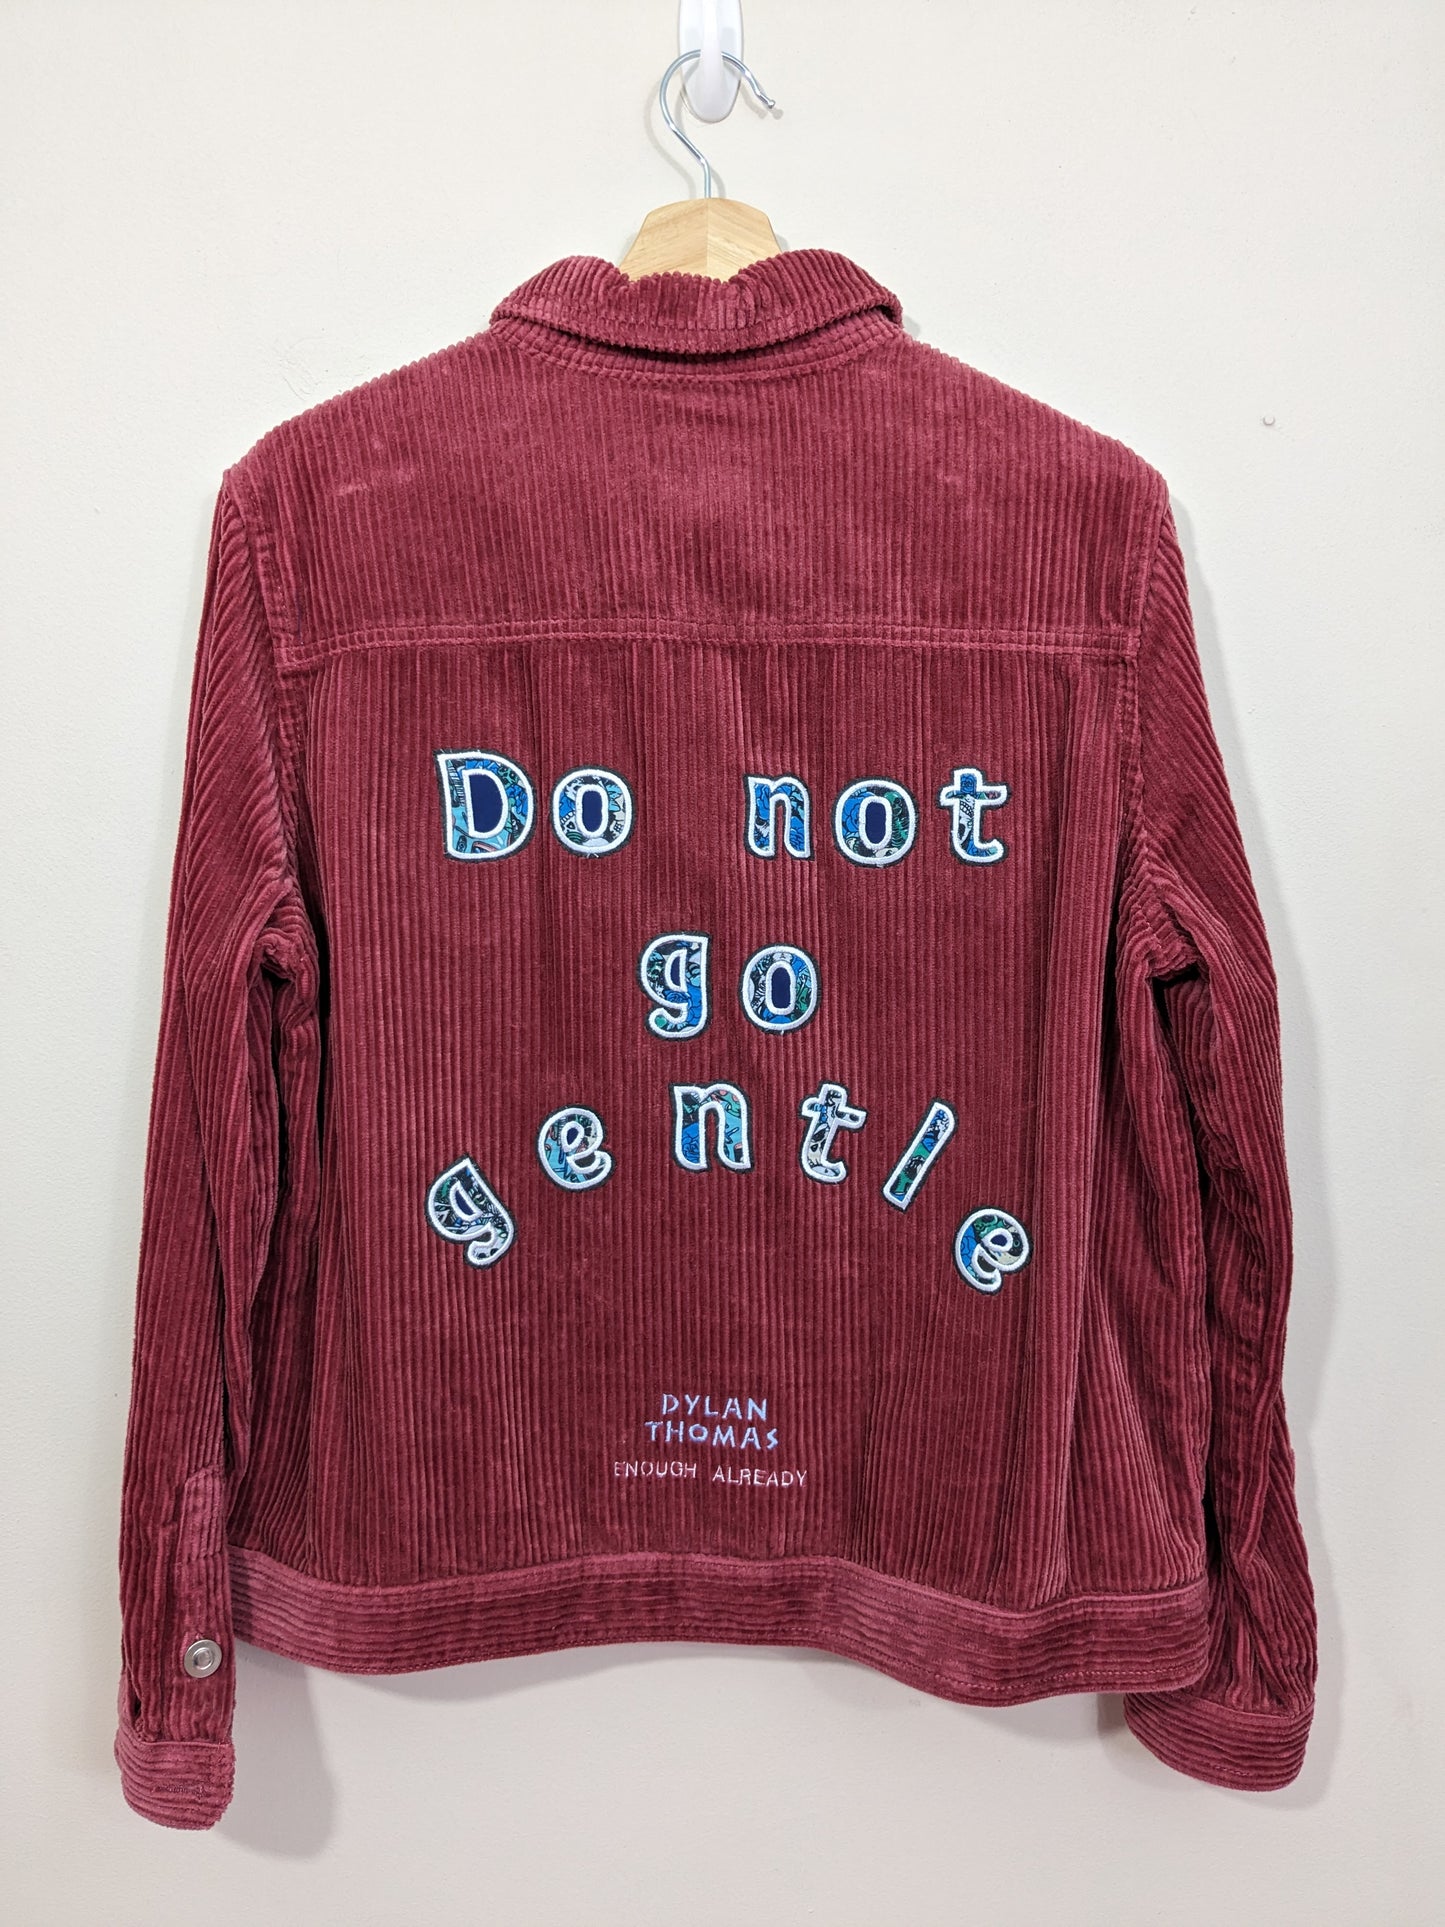 Size 14 Reworked Corduroy Jacket - Hand Sewn Applique - Do Not Go Gentle by Dylan Thomas